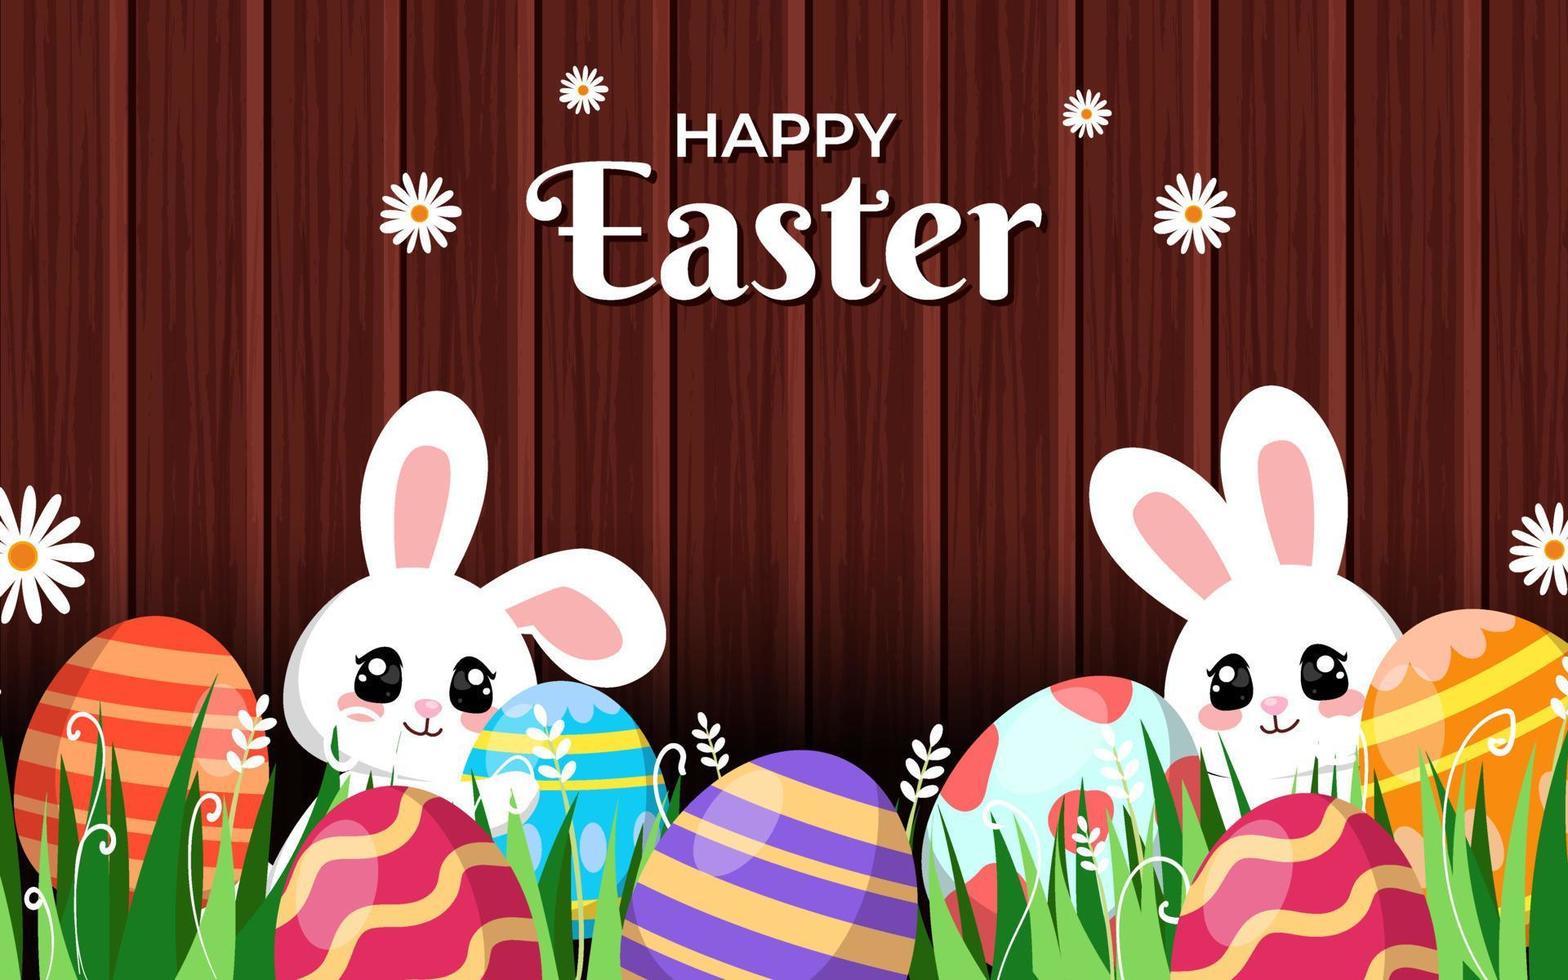 Happy Easter with Rabbit Background vector